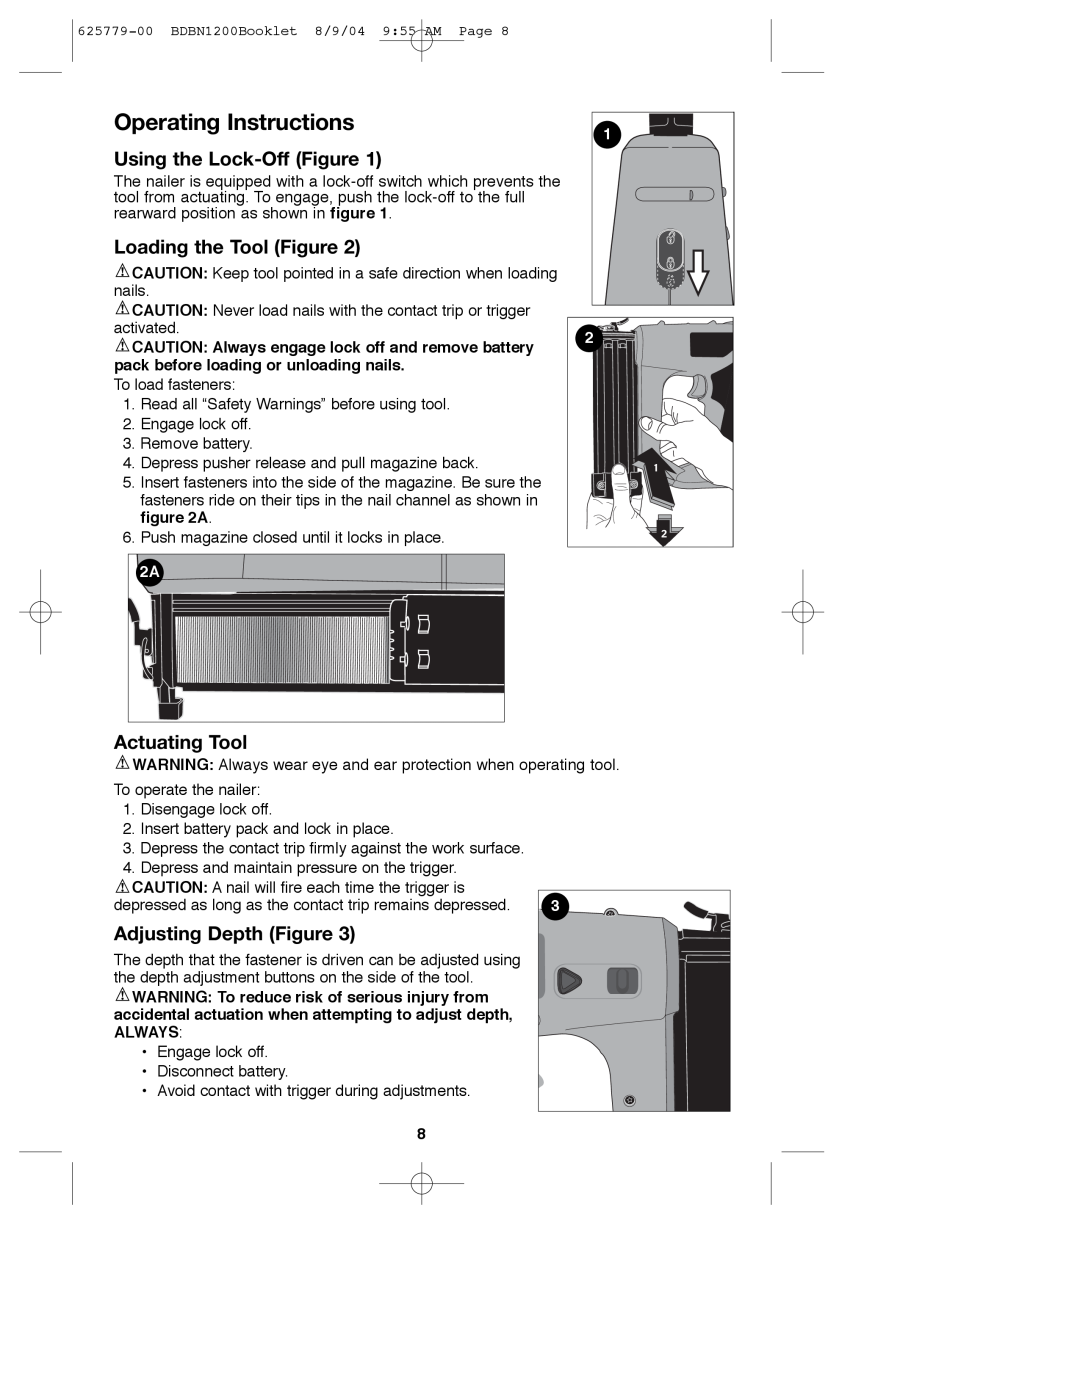 Black & Decker 625779-00 Operating Instructions, Using the Lock-Off Figure, Loading the Tool Figure, Actuating Tool 